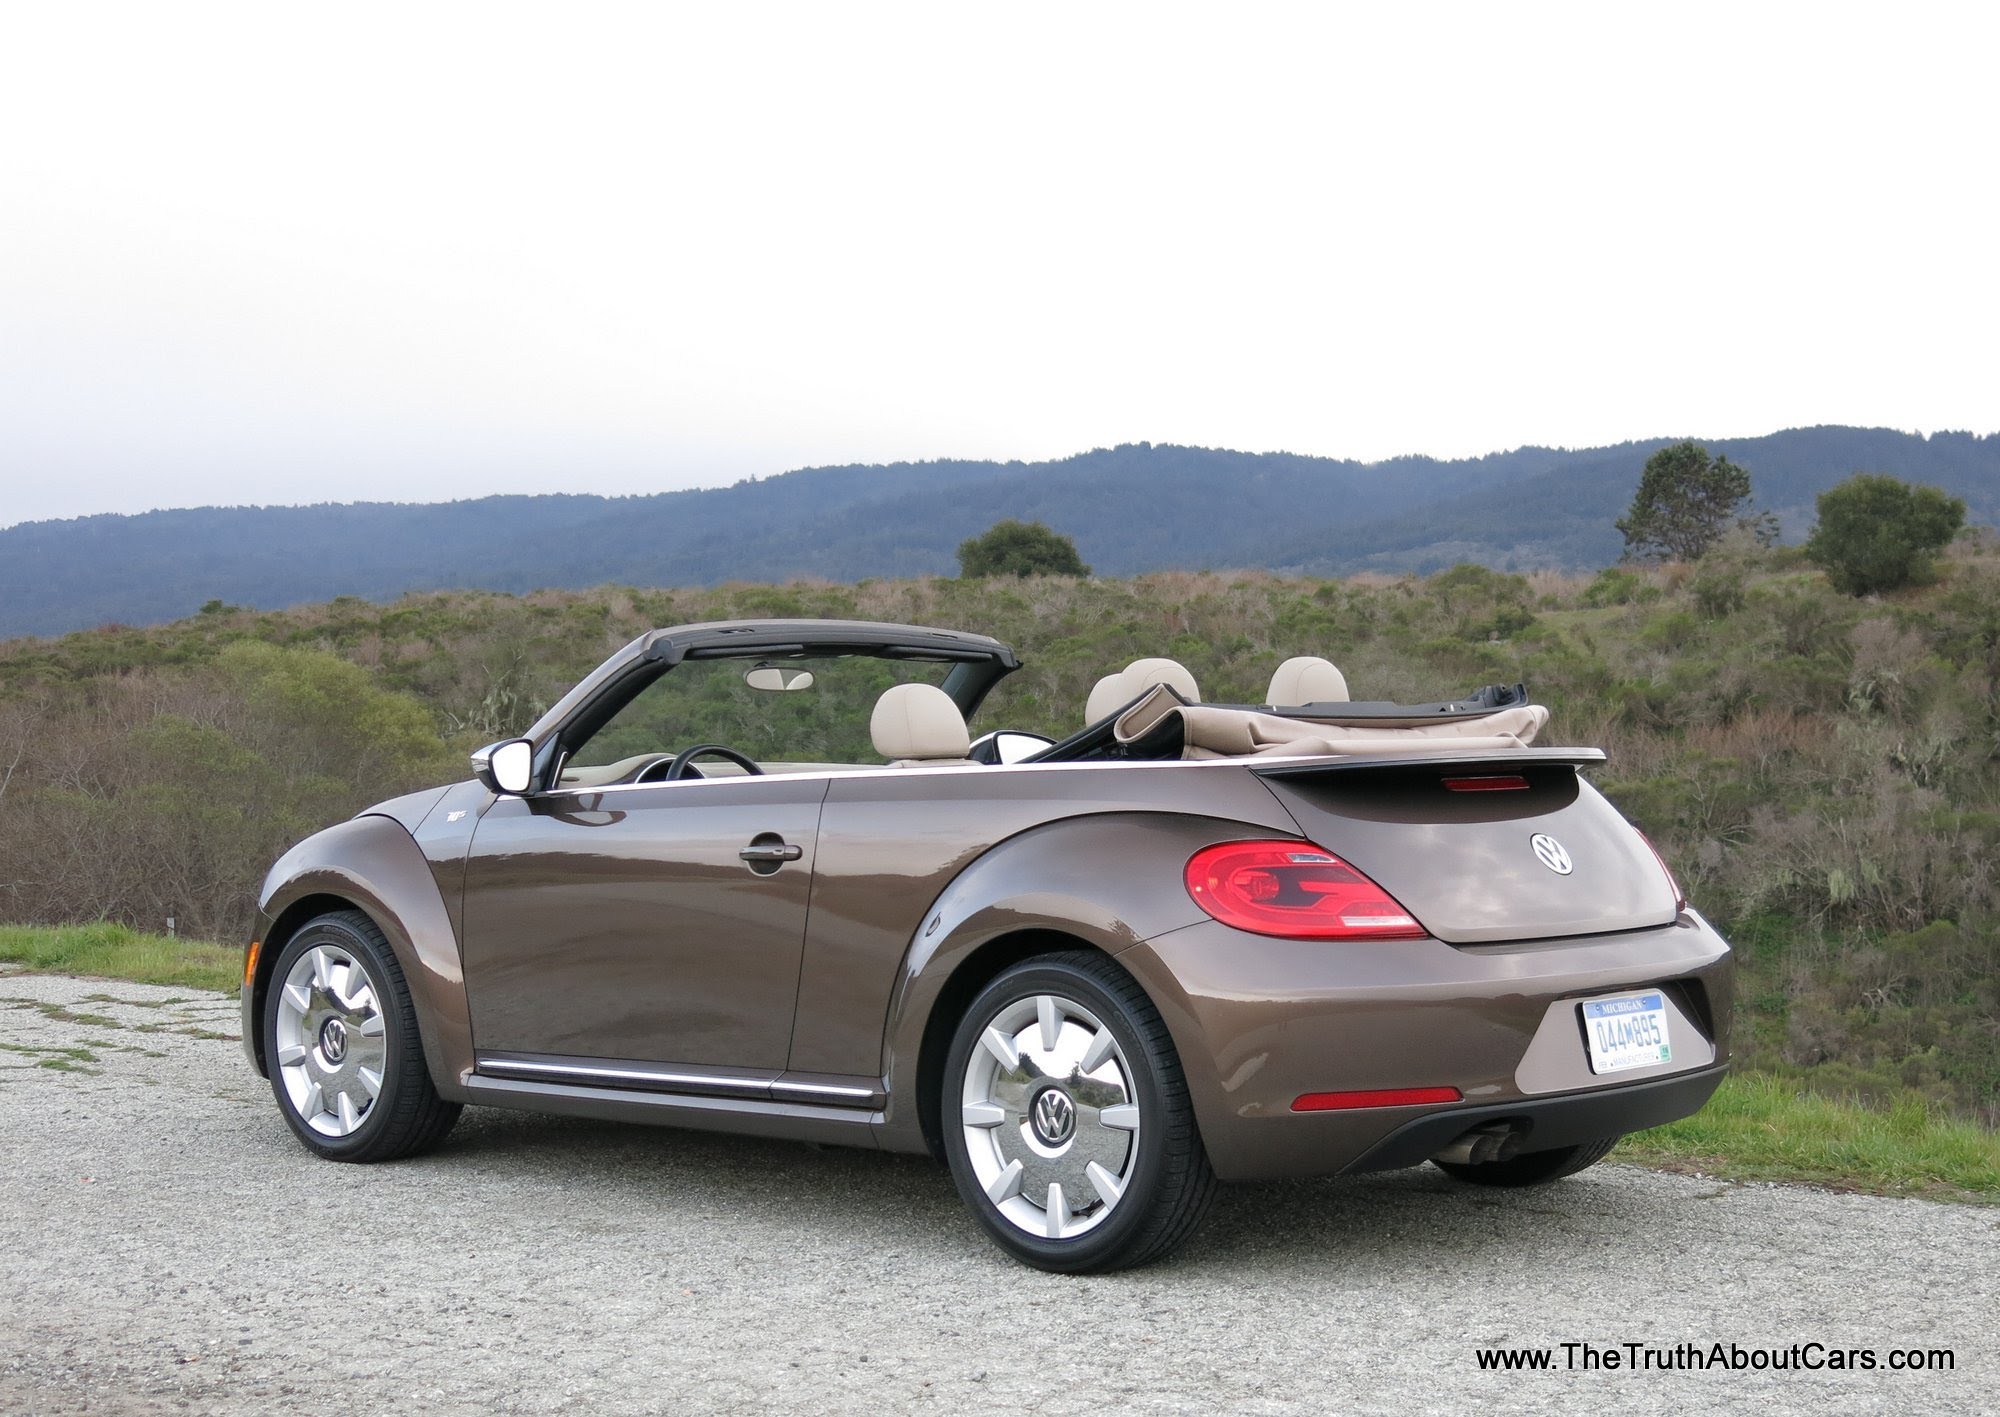 2013 Volkswagen Beetle Convertible Review and Road Test - YouTube